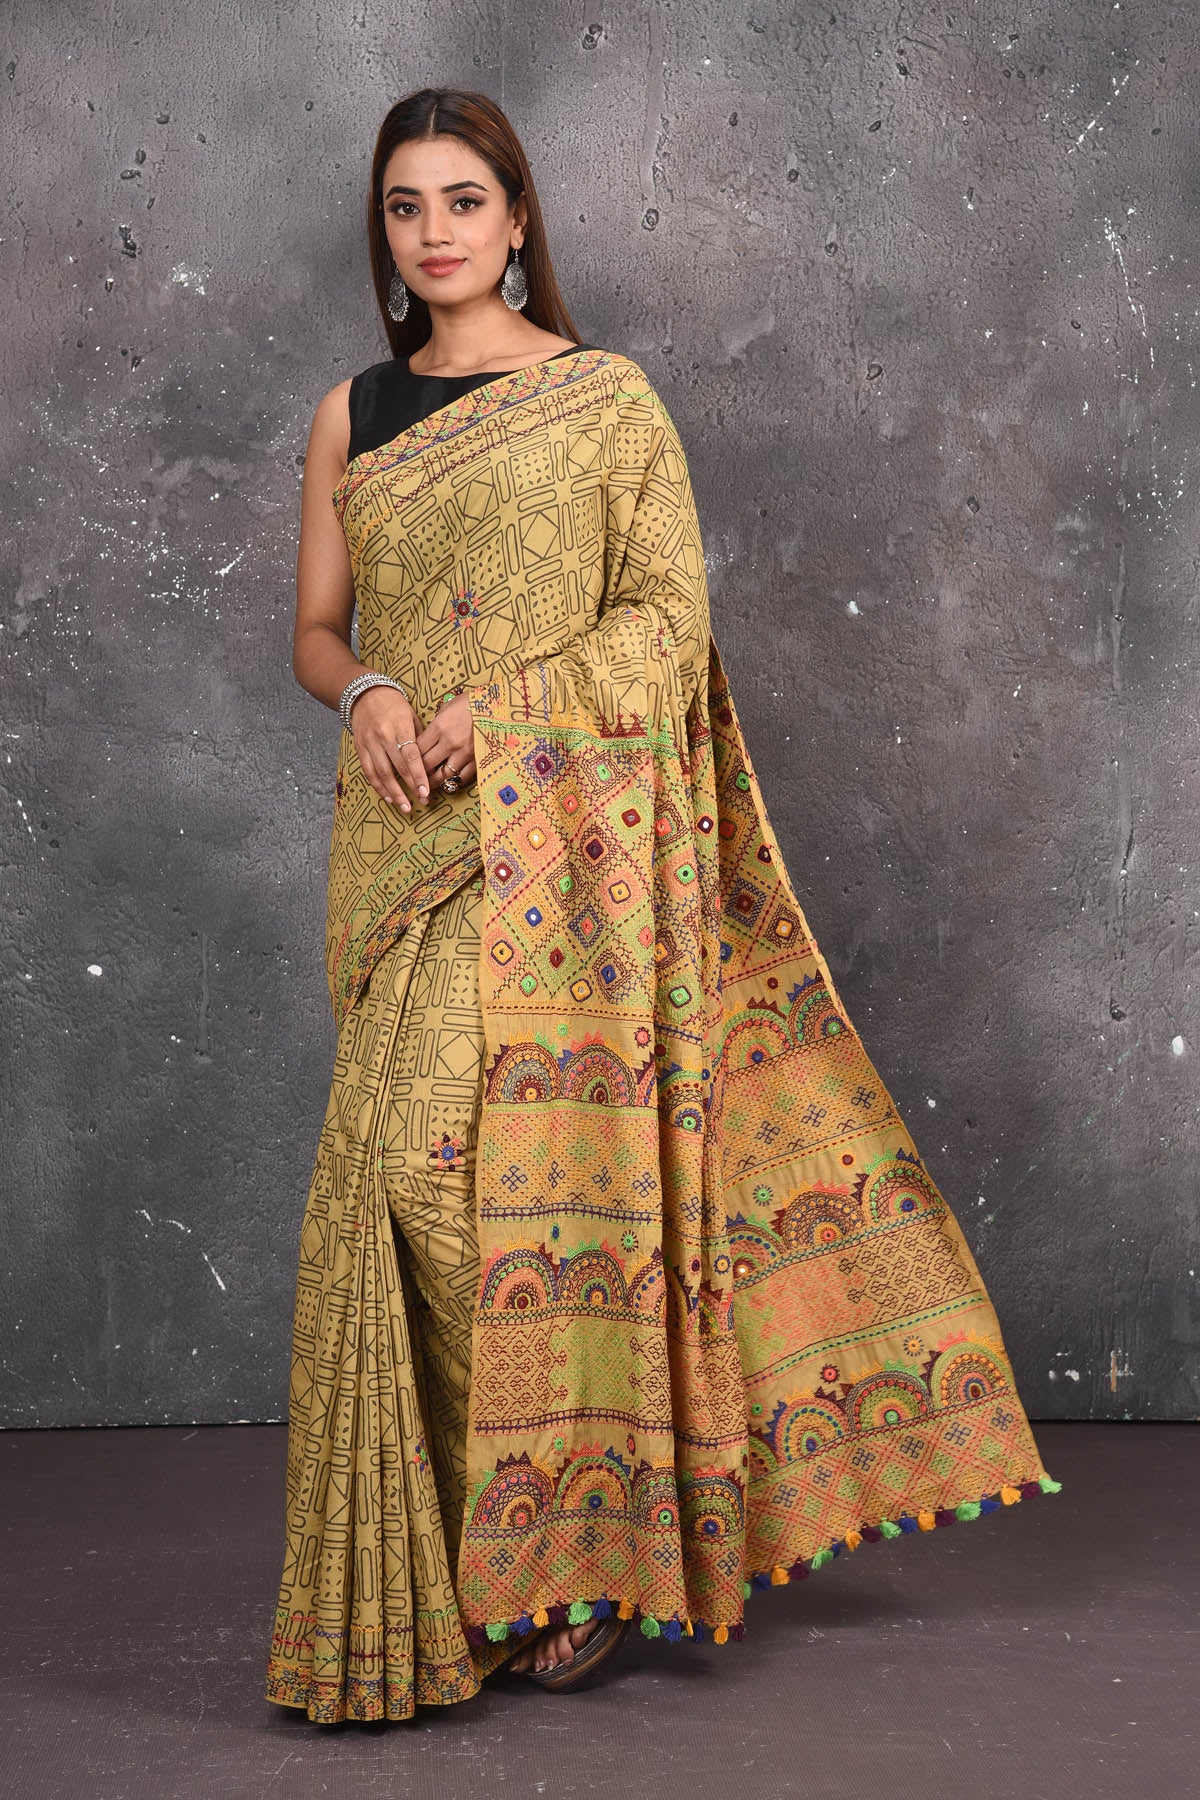 Shop this classy mustard yellow hand painted madhubani cotton saree online in USA. Perfect to be worn as part of your everyday work wear, with this hand-painted Mustard Yellow Madhubani saree, elegance meets traditional. Add this designer Lambani embroidery designer saree to your collection from Pure Elegance Indian Fashion Store in USA.- Full view with open pallu.